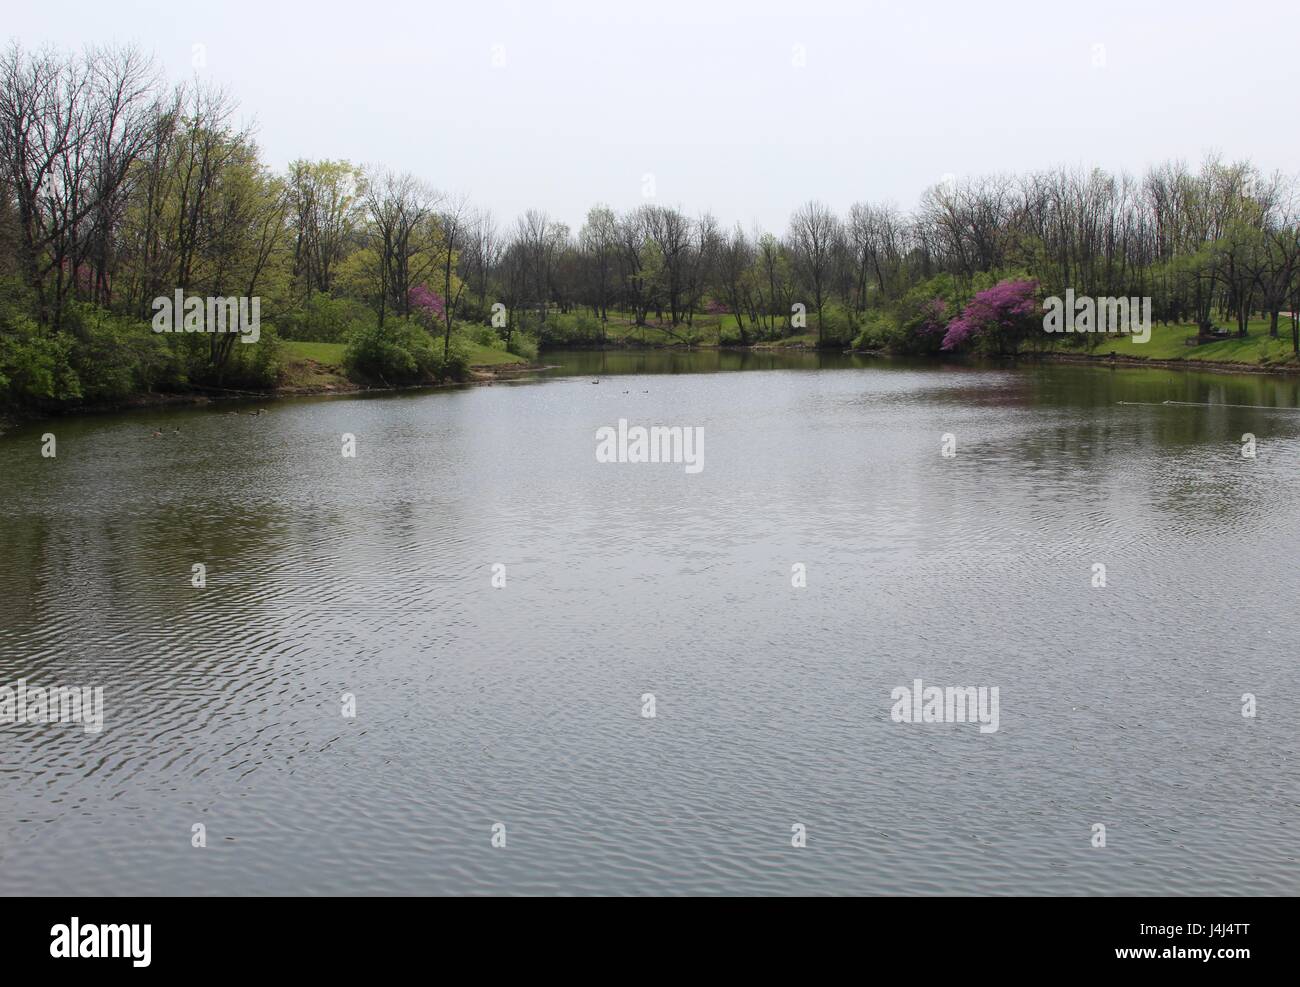 The sunny spring day at the park on the trails and by the lake. Stock Photo